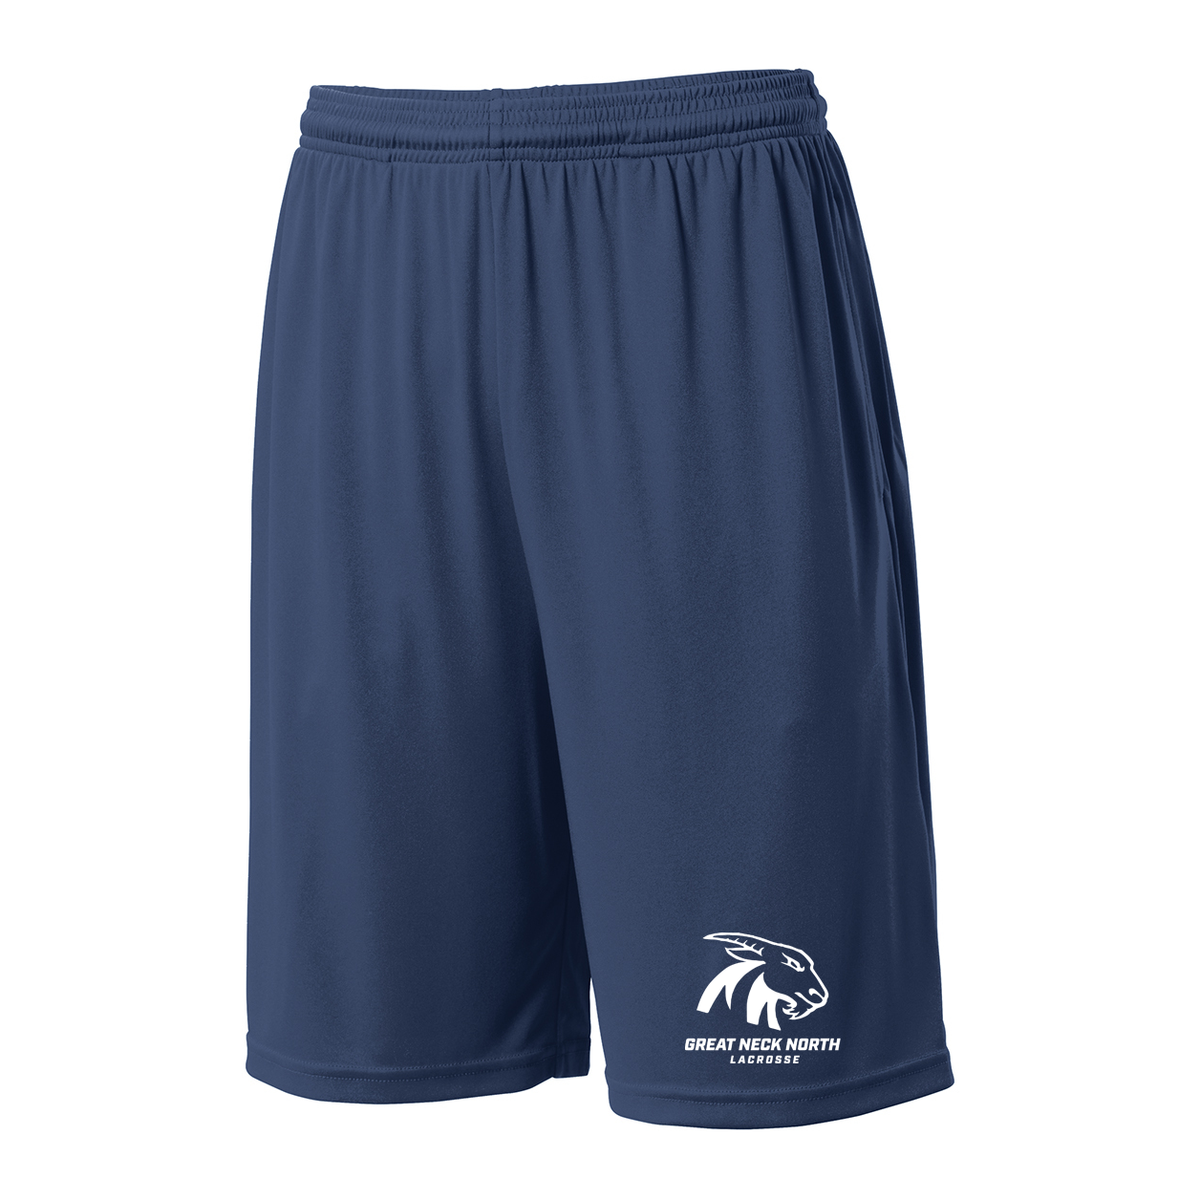 Great Neck North HS Lacrosse Shorts